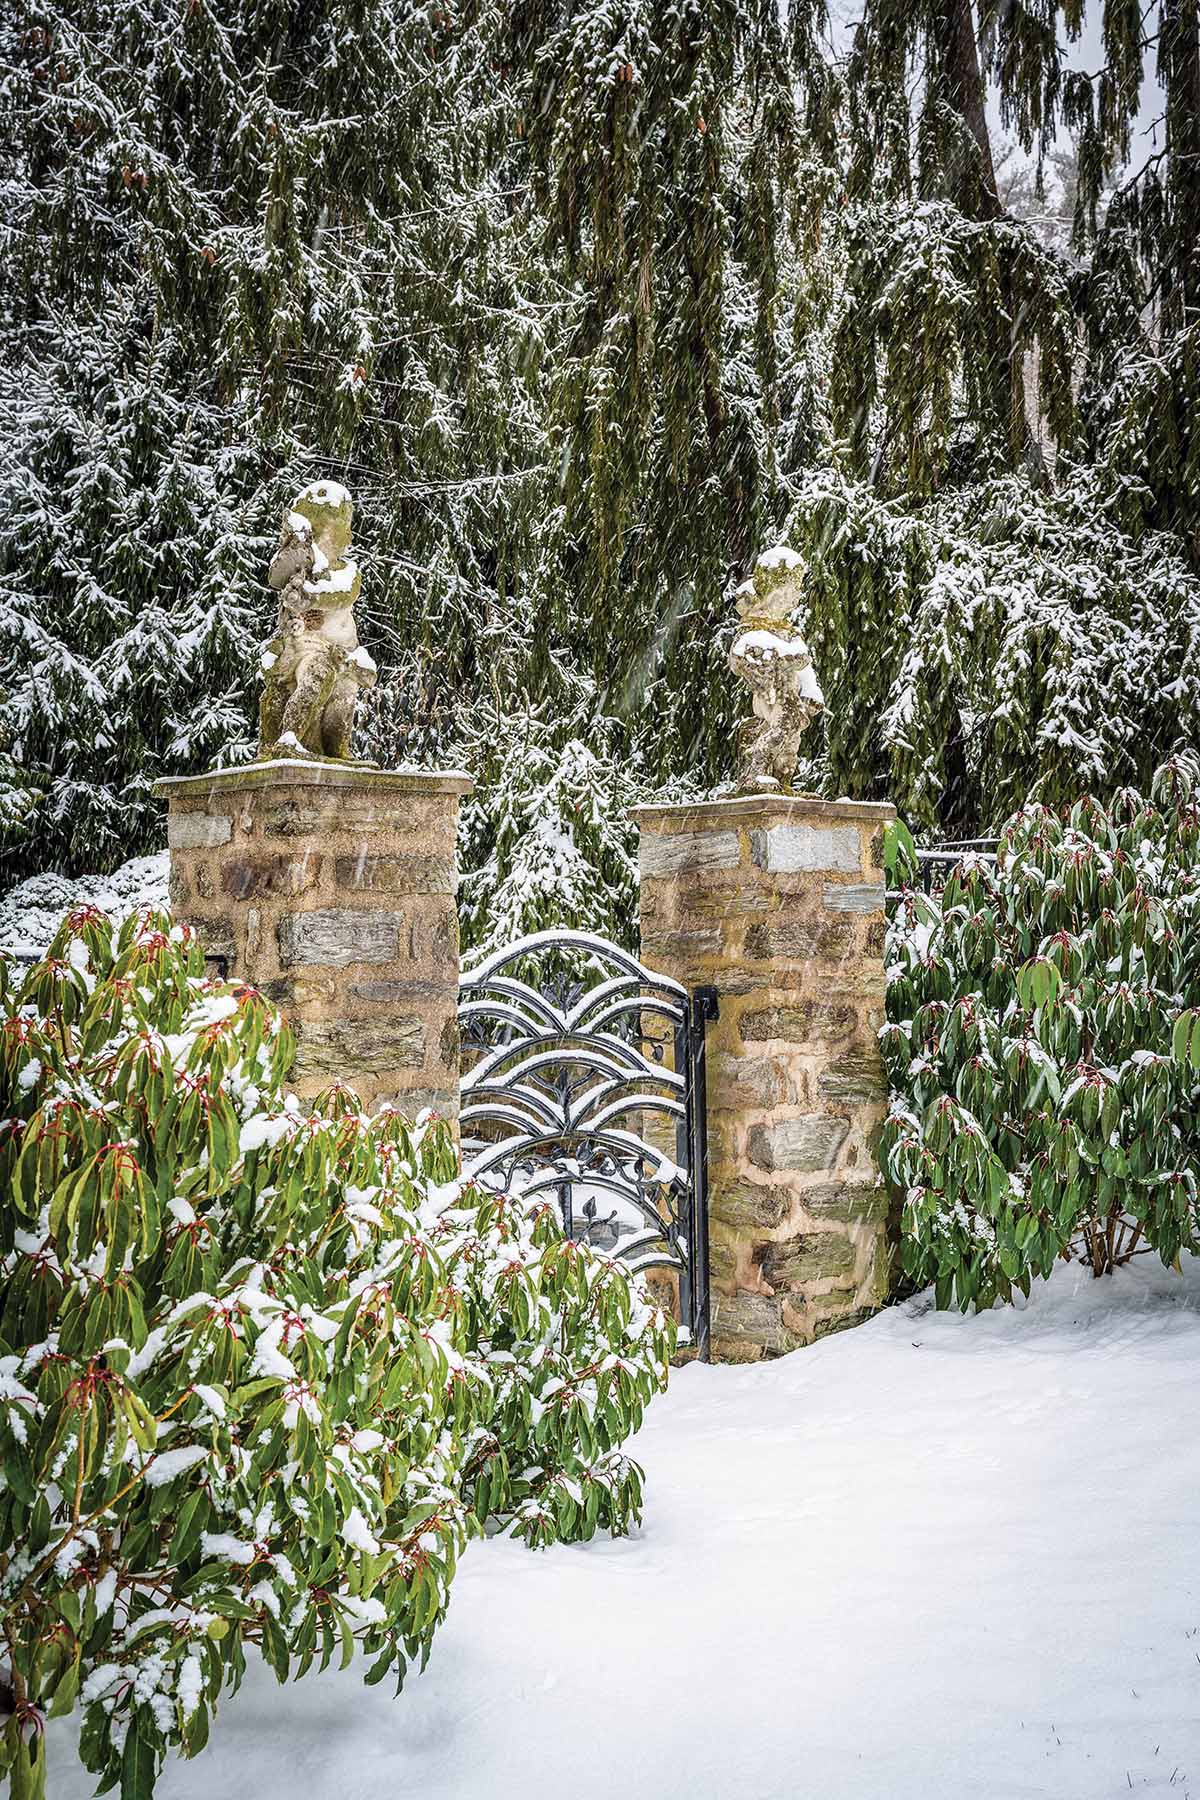 A snow-dusted iron gate in a garden.